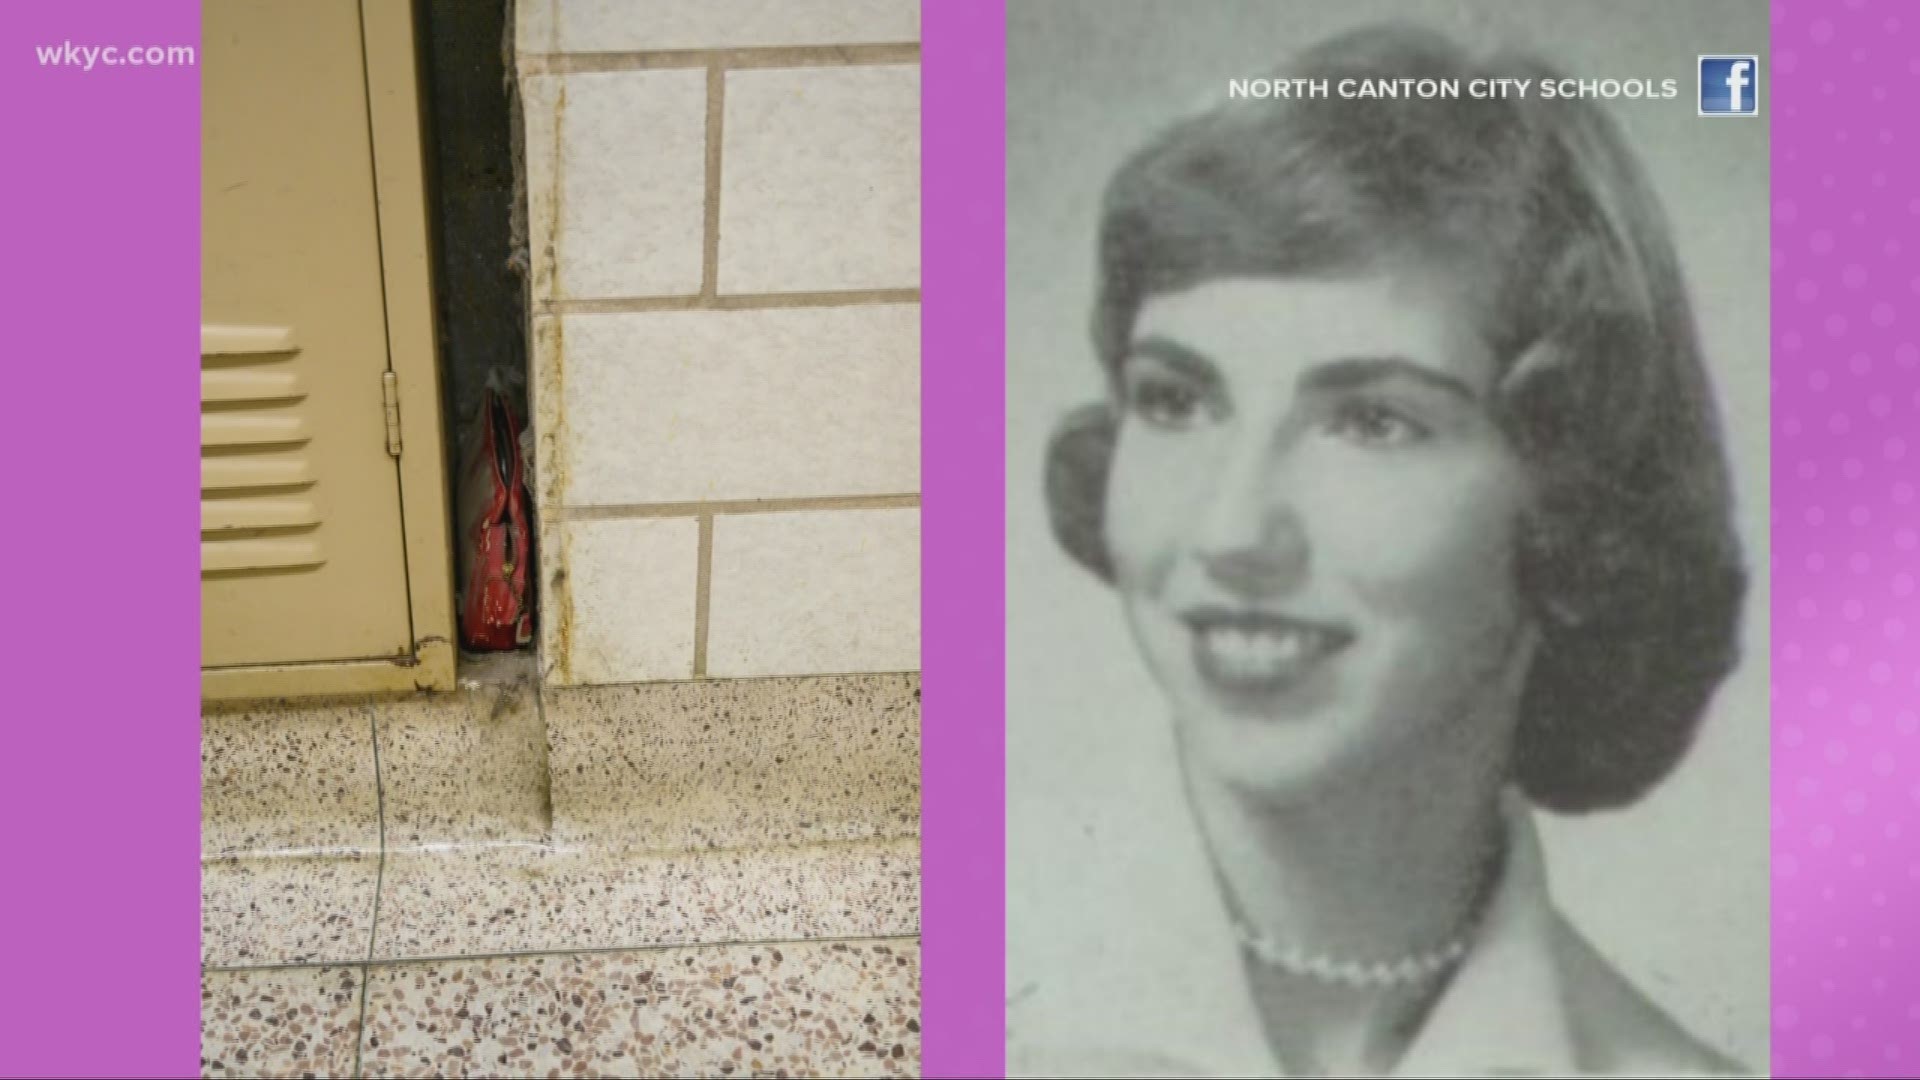 Purse found in North Canton middle school decades after it was lost